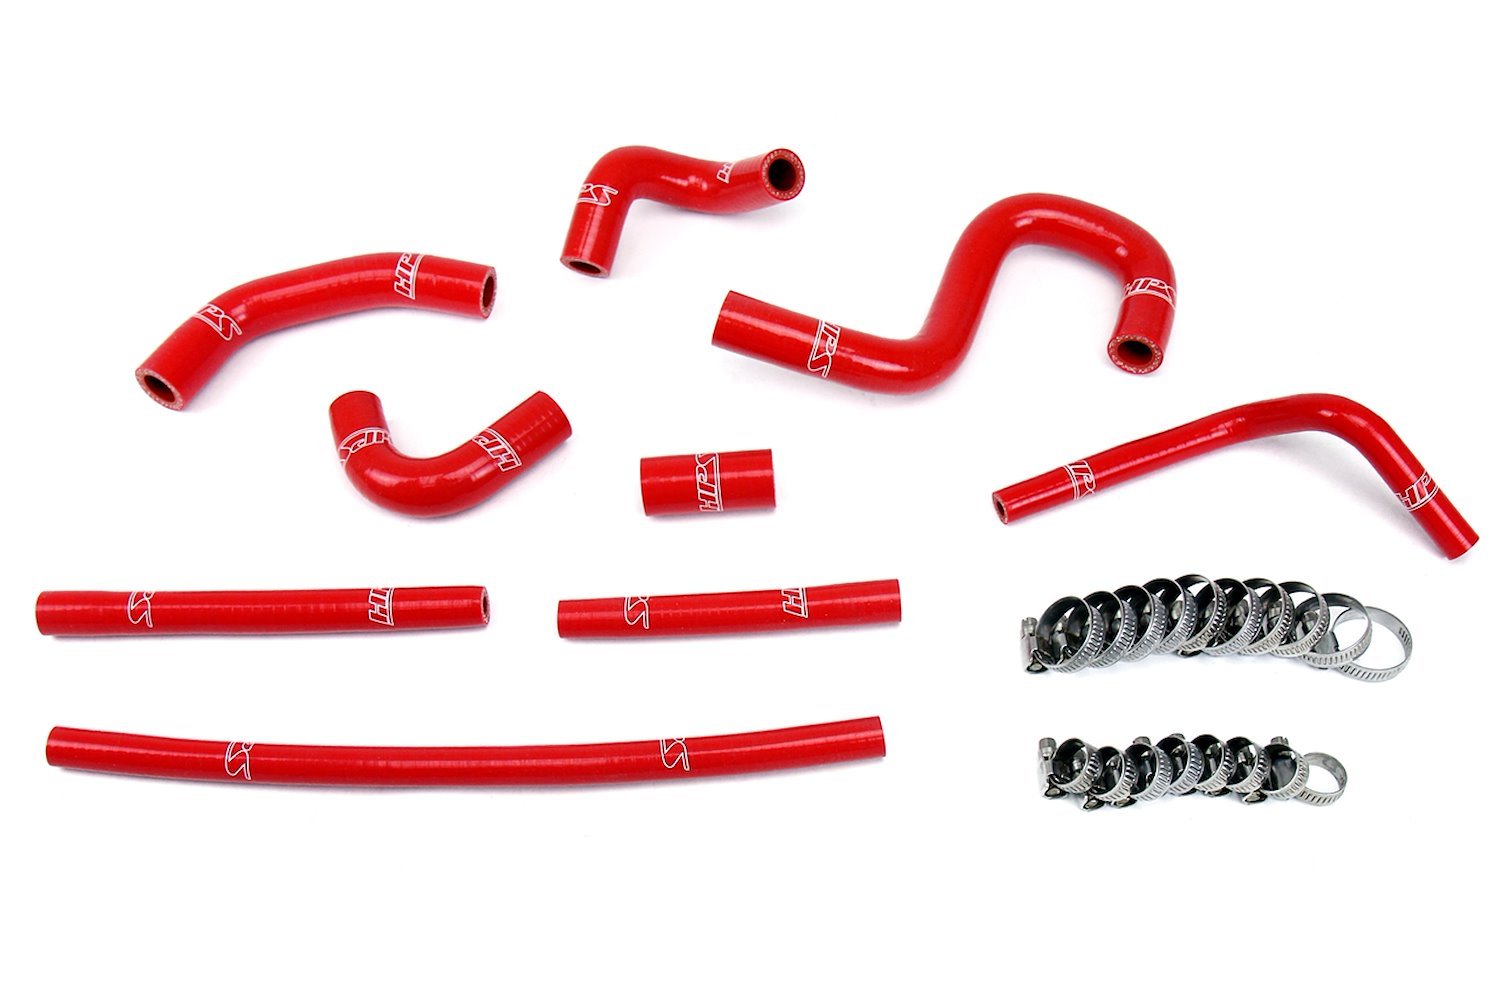 57-1798-RED Heater Hose Kit, High-Temp 3-Ply Reinforced Silicone, Replace OEM Rubber Heater Coolant Hoses